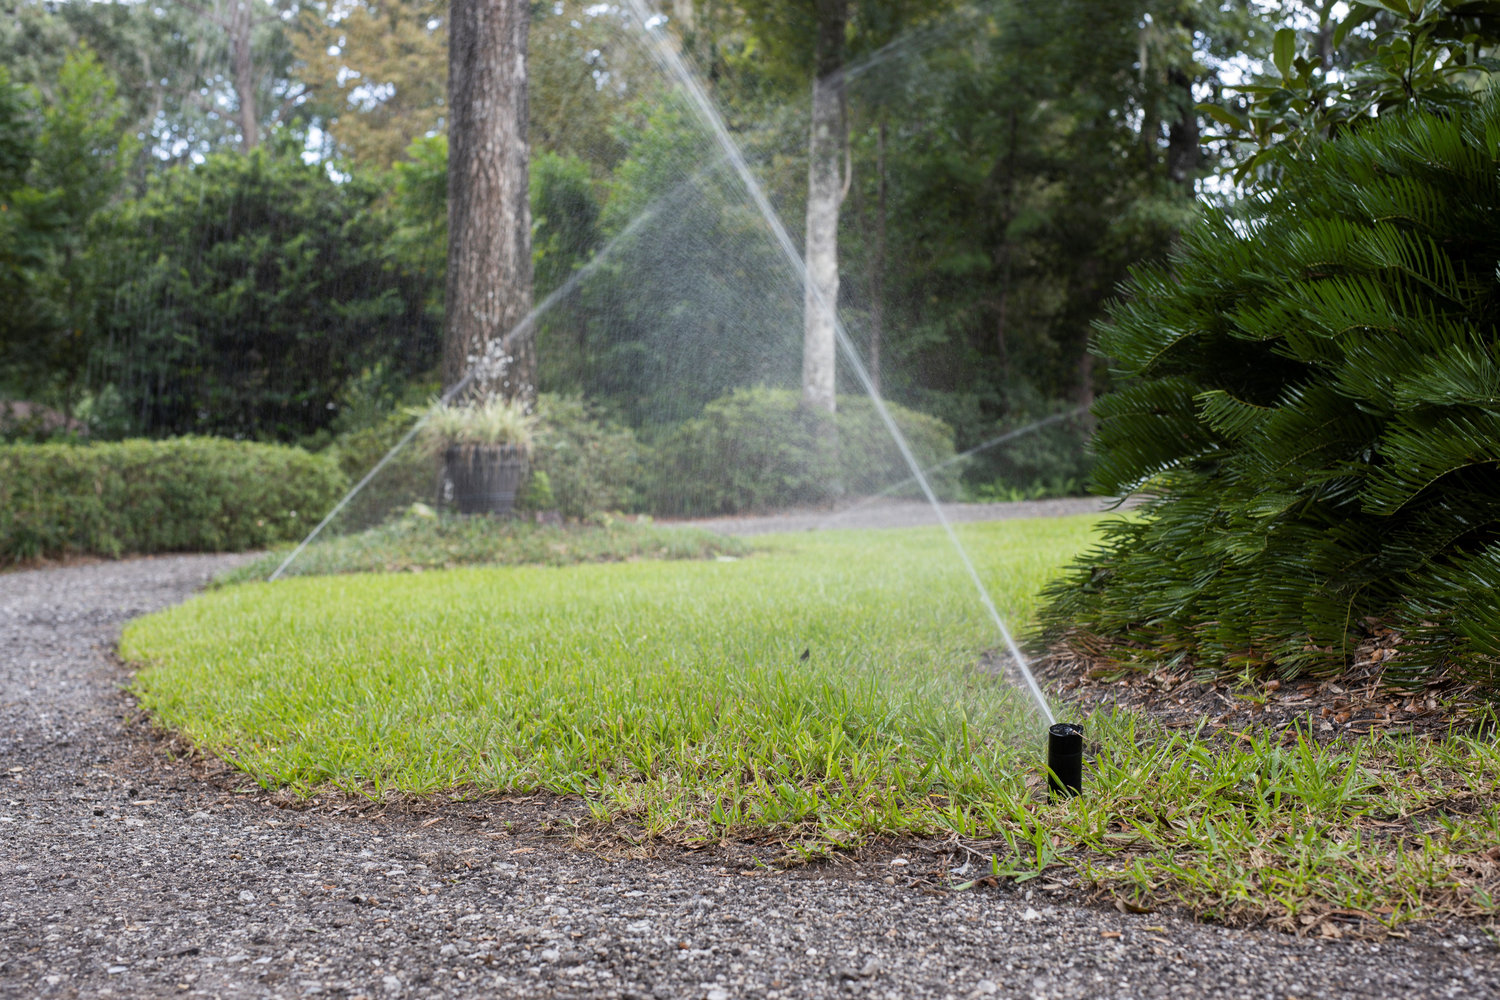 Pop-up, in-ground sprinkler head and home irrigation system.